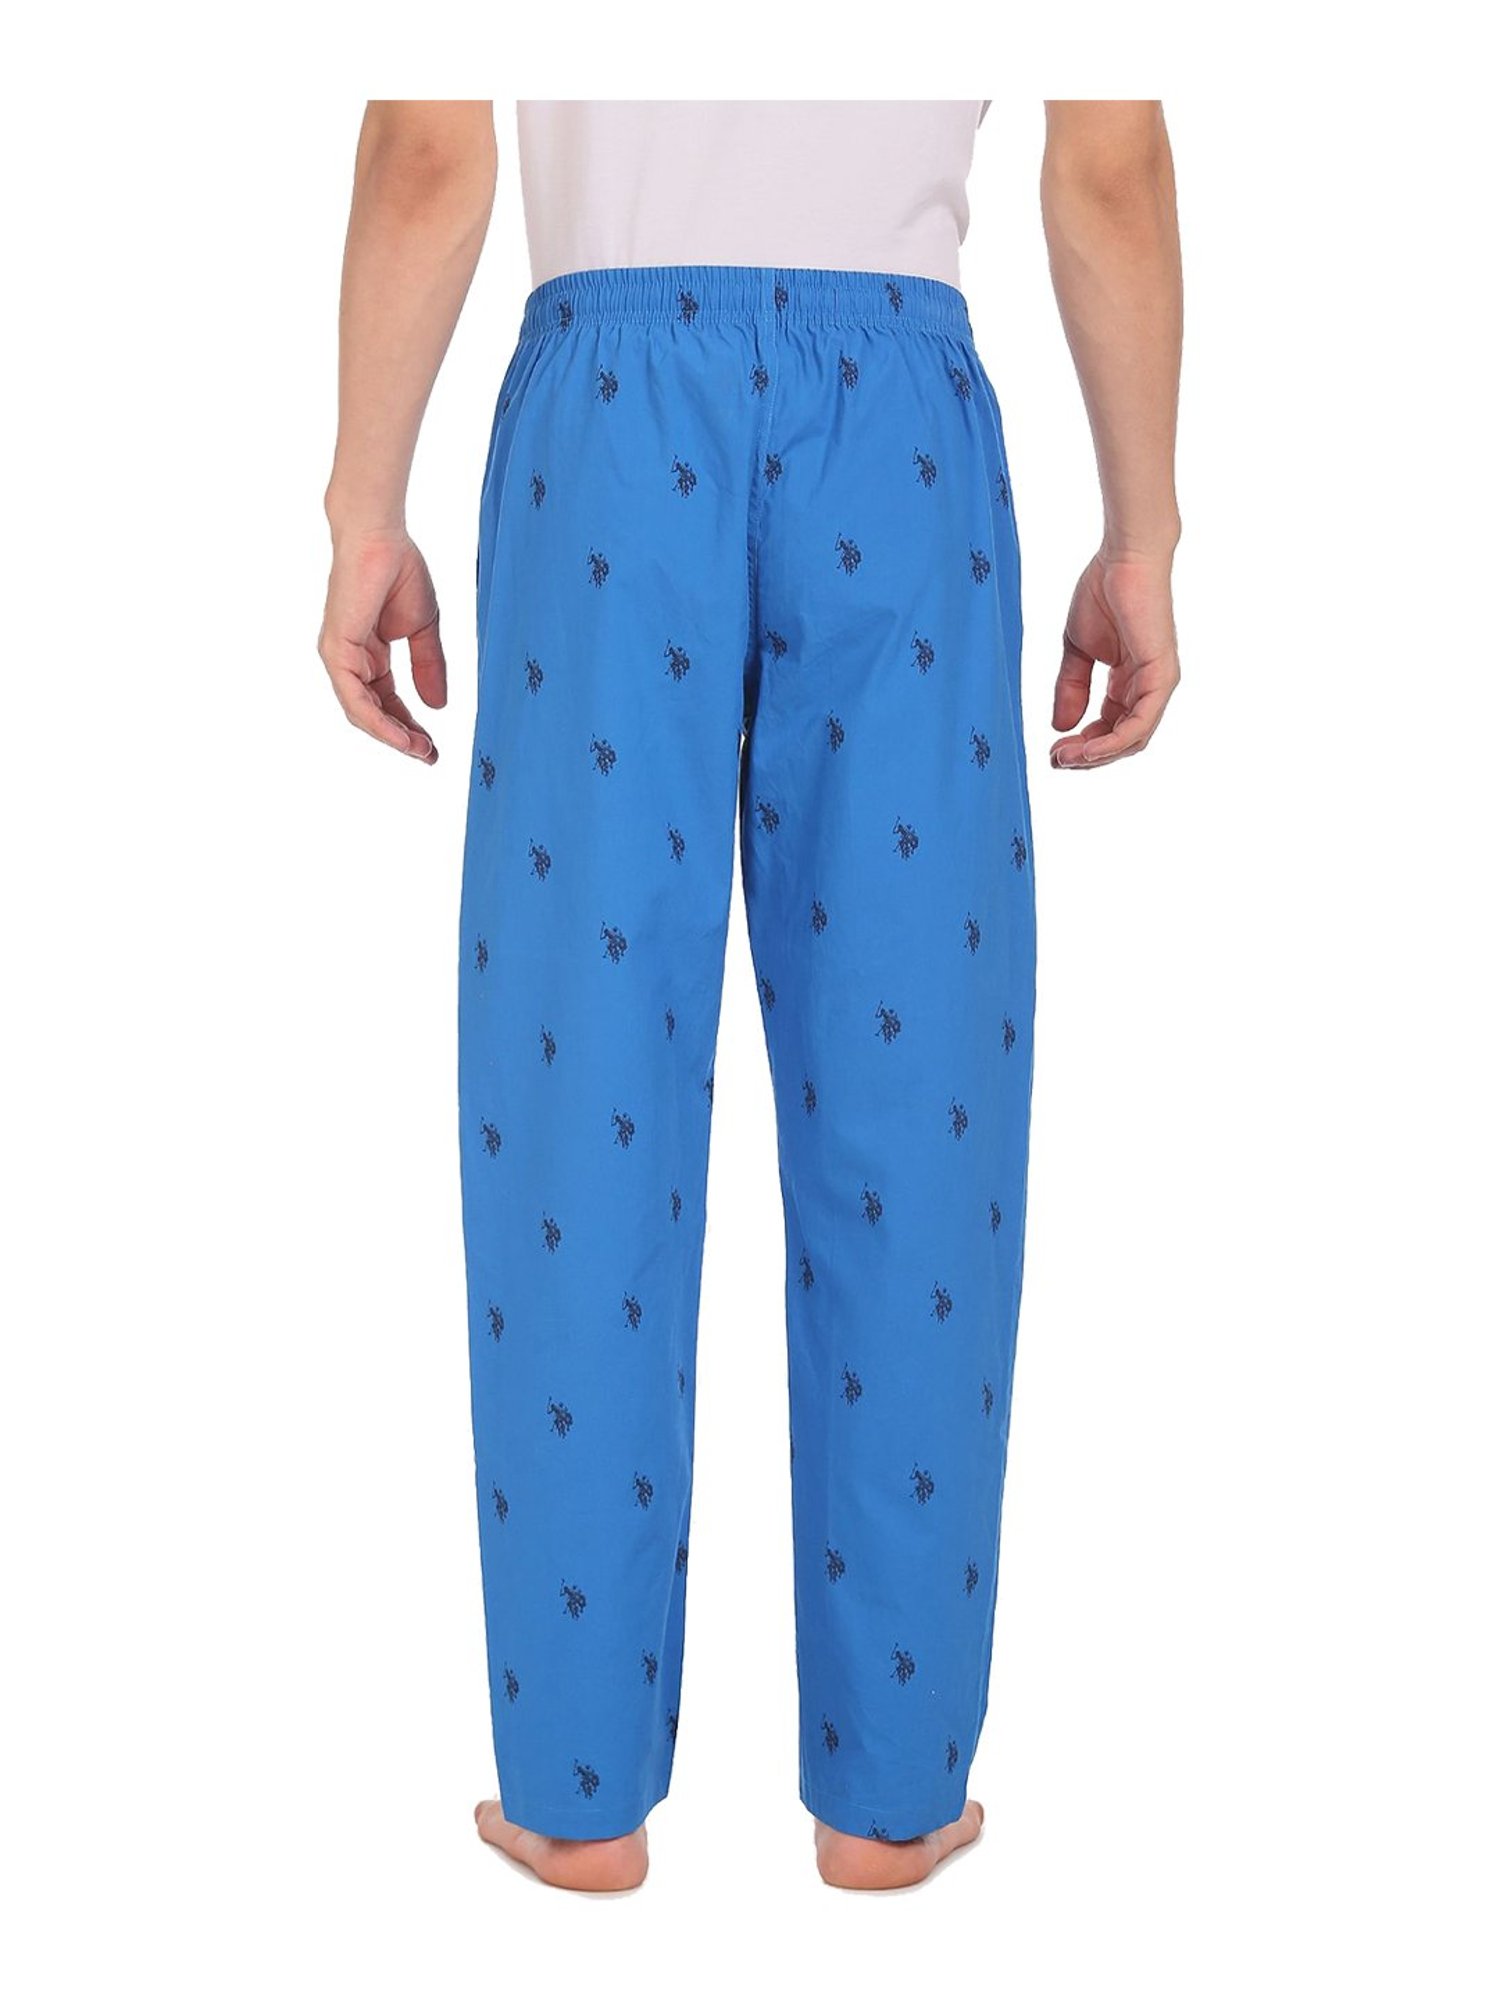 UFO NEPAL  Rs 2288 Item Code 88781 Mens US Polo Assn Lounge Pants  Available Colors Black Red and Blue Printed Color Available Size S M L  Location Kumaripati Maharajgunj Baneshwor City Center  Facebook